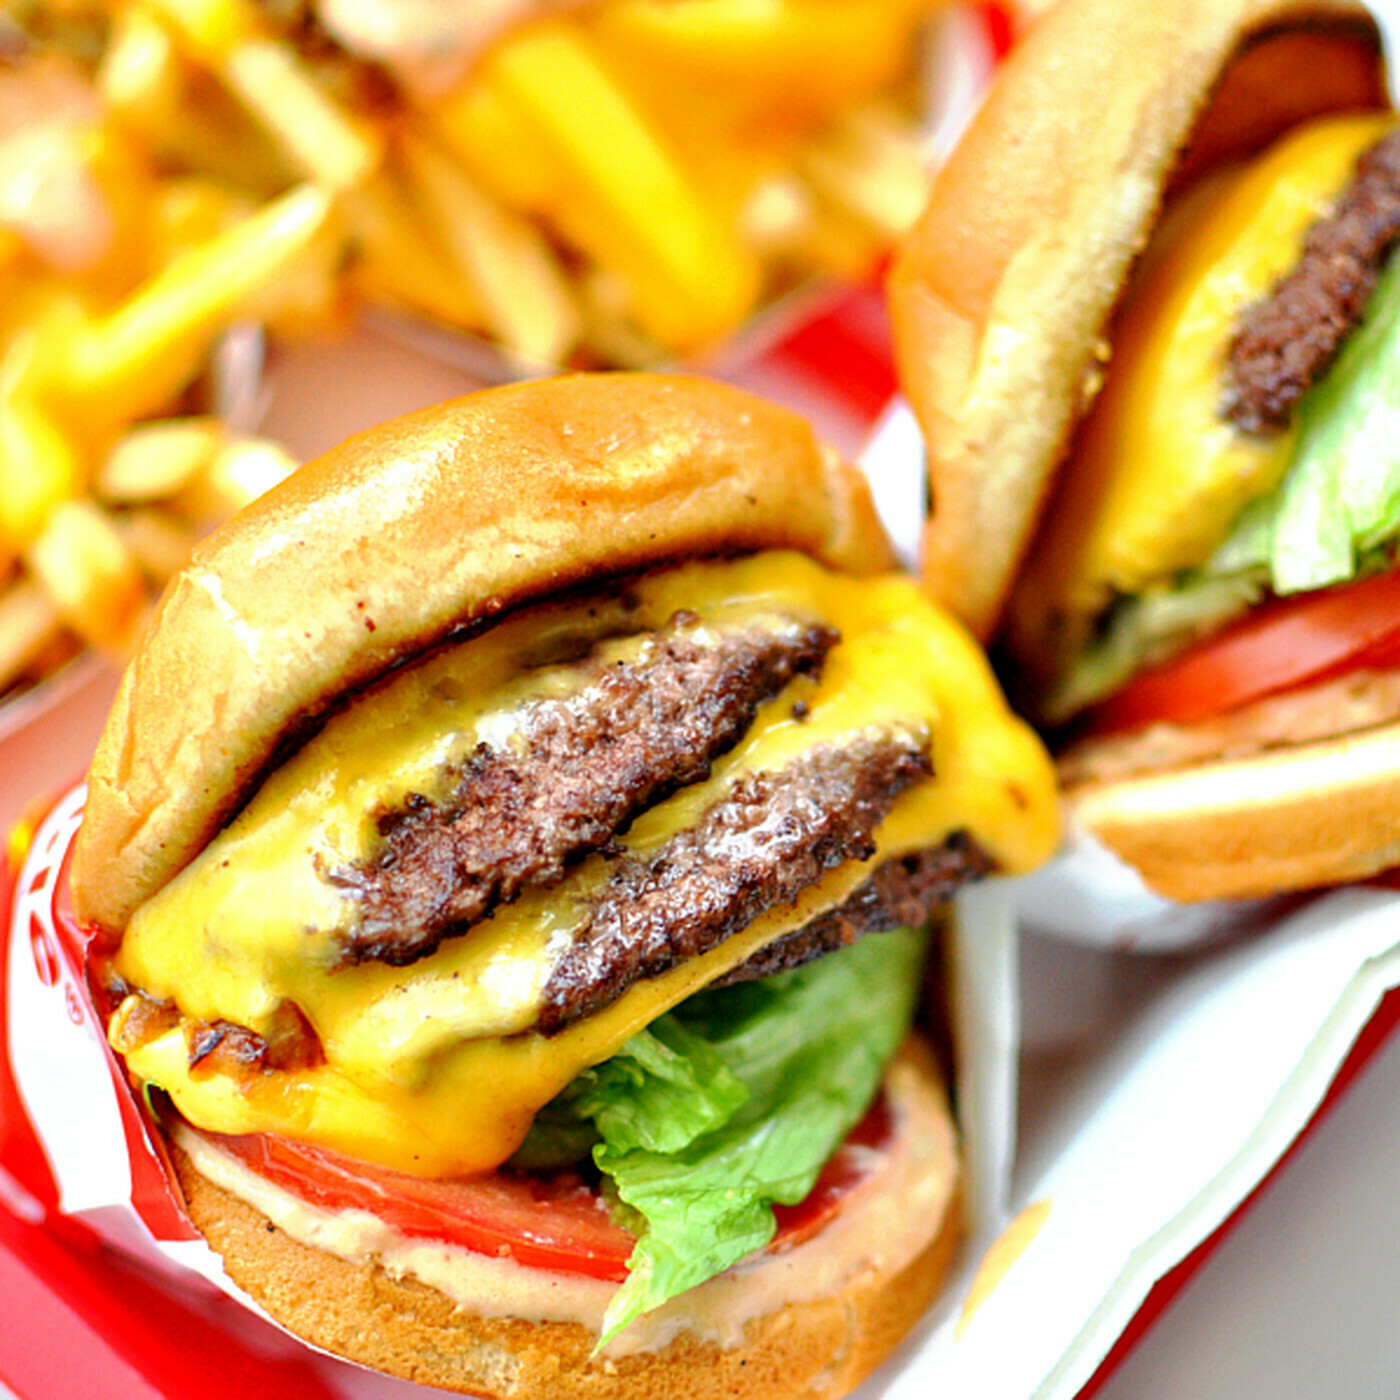 IN-N-OUT (Ethiopia only)